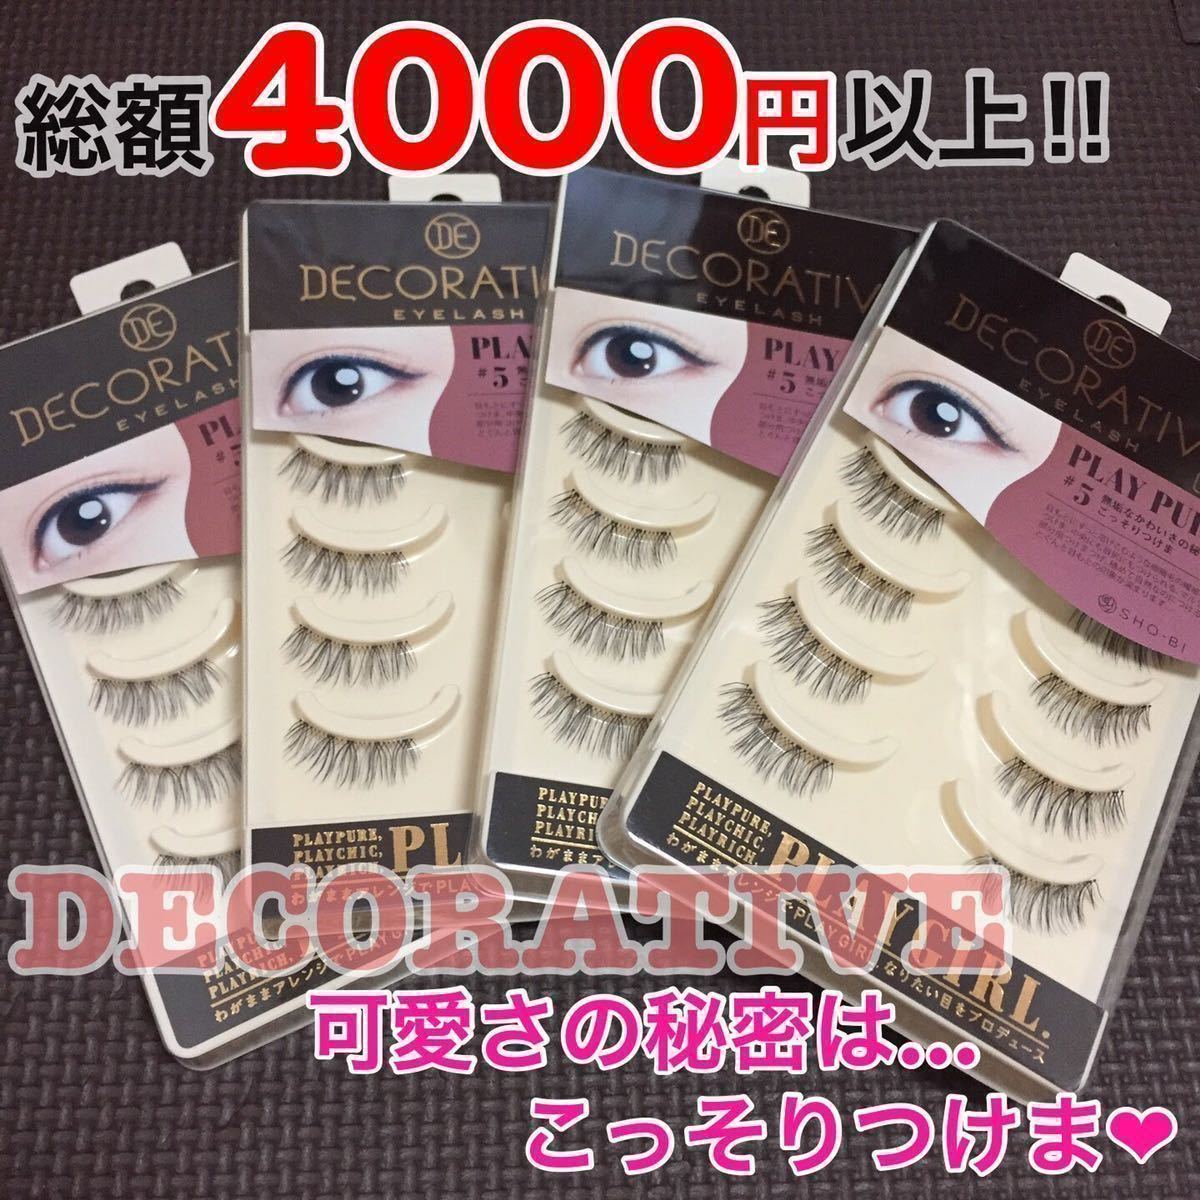  free shipping * prompt decision * sum total 4000 jpy and more * new goods deco Latte .b#5* nature .. . impression deep! secretly attaching .*4 pack 